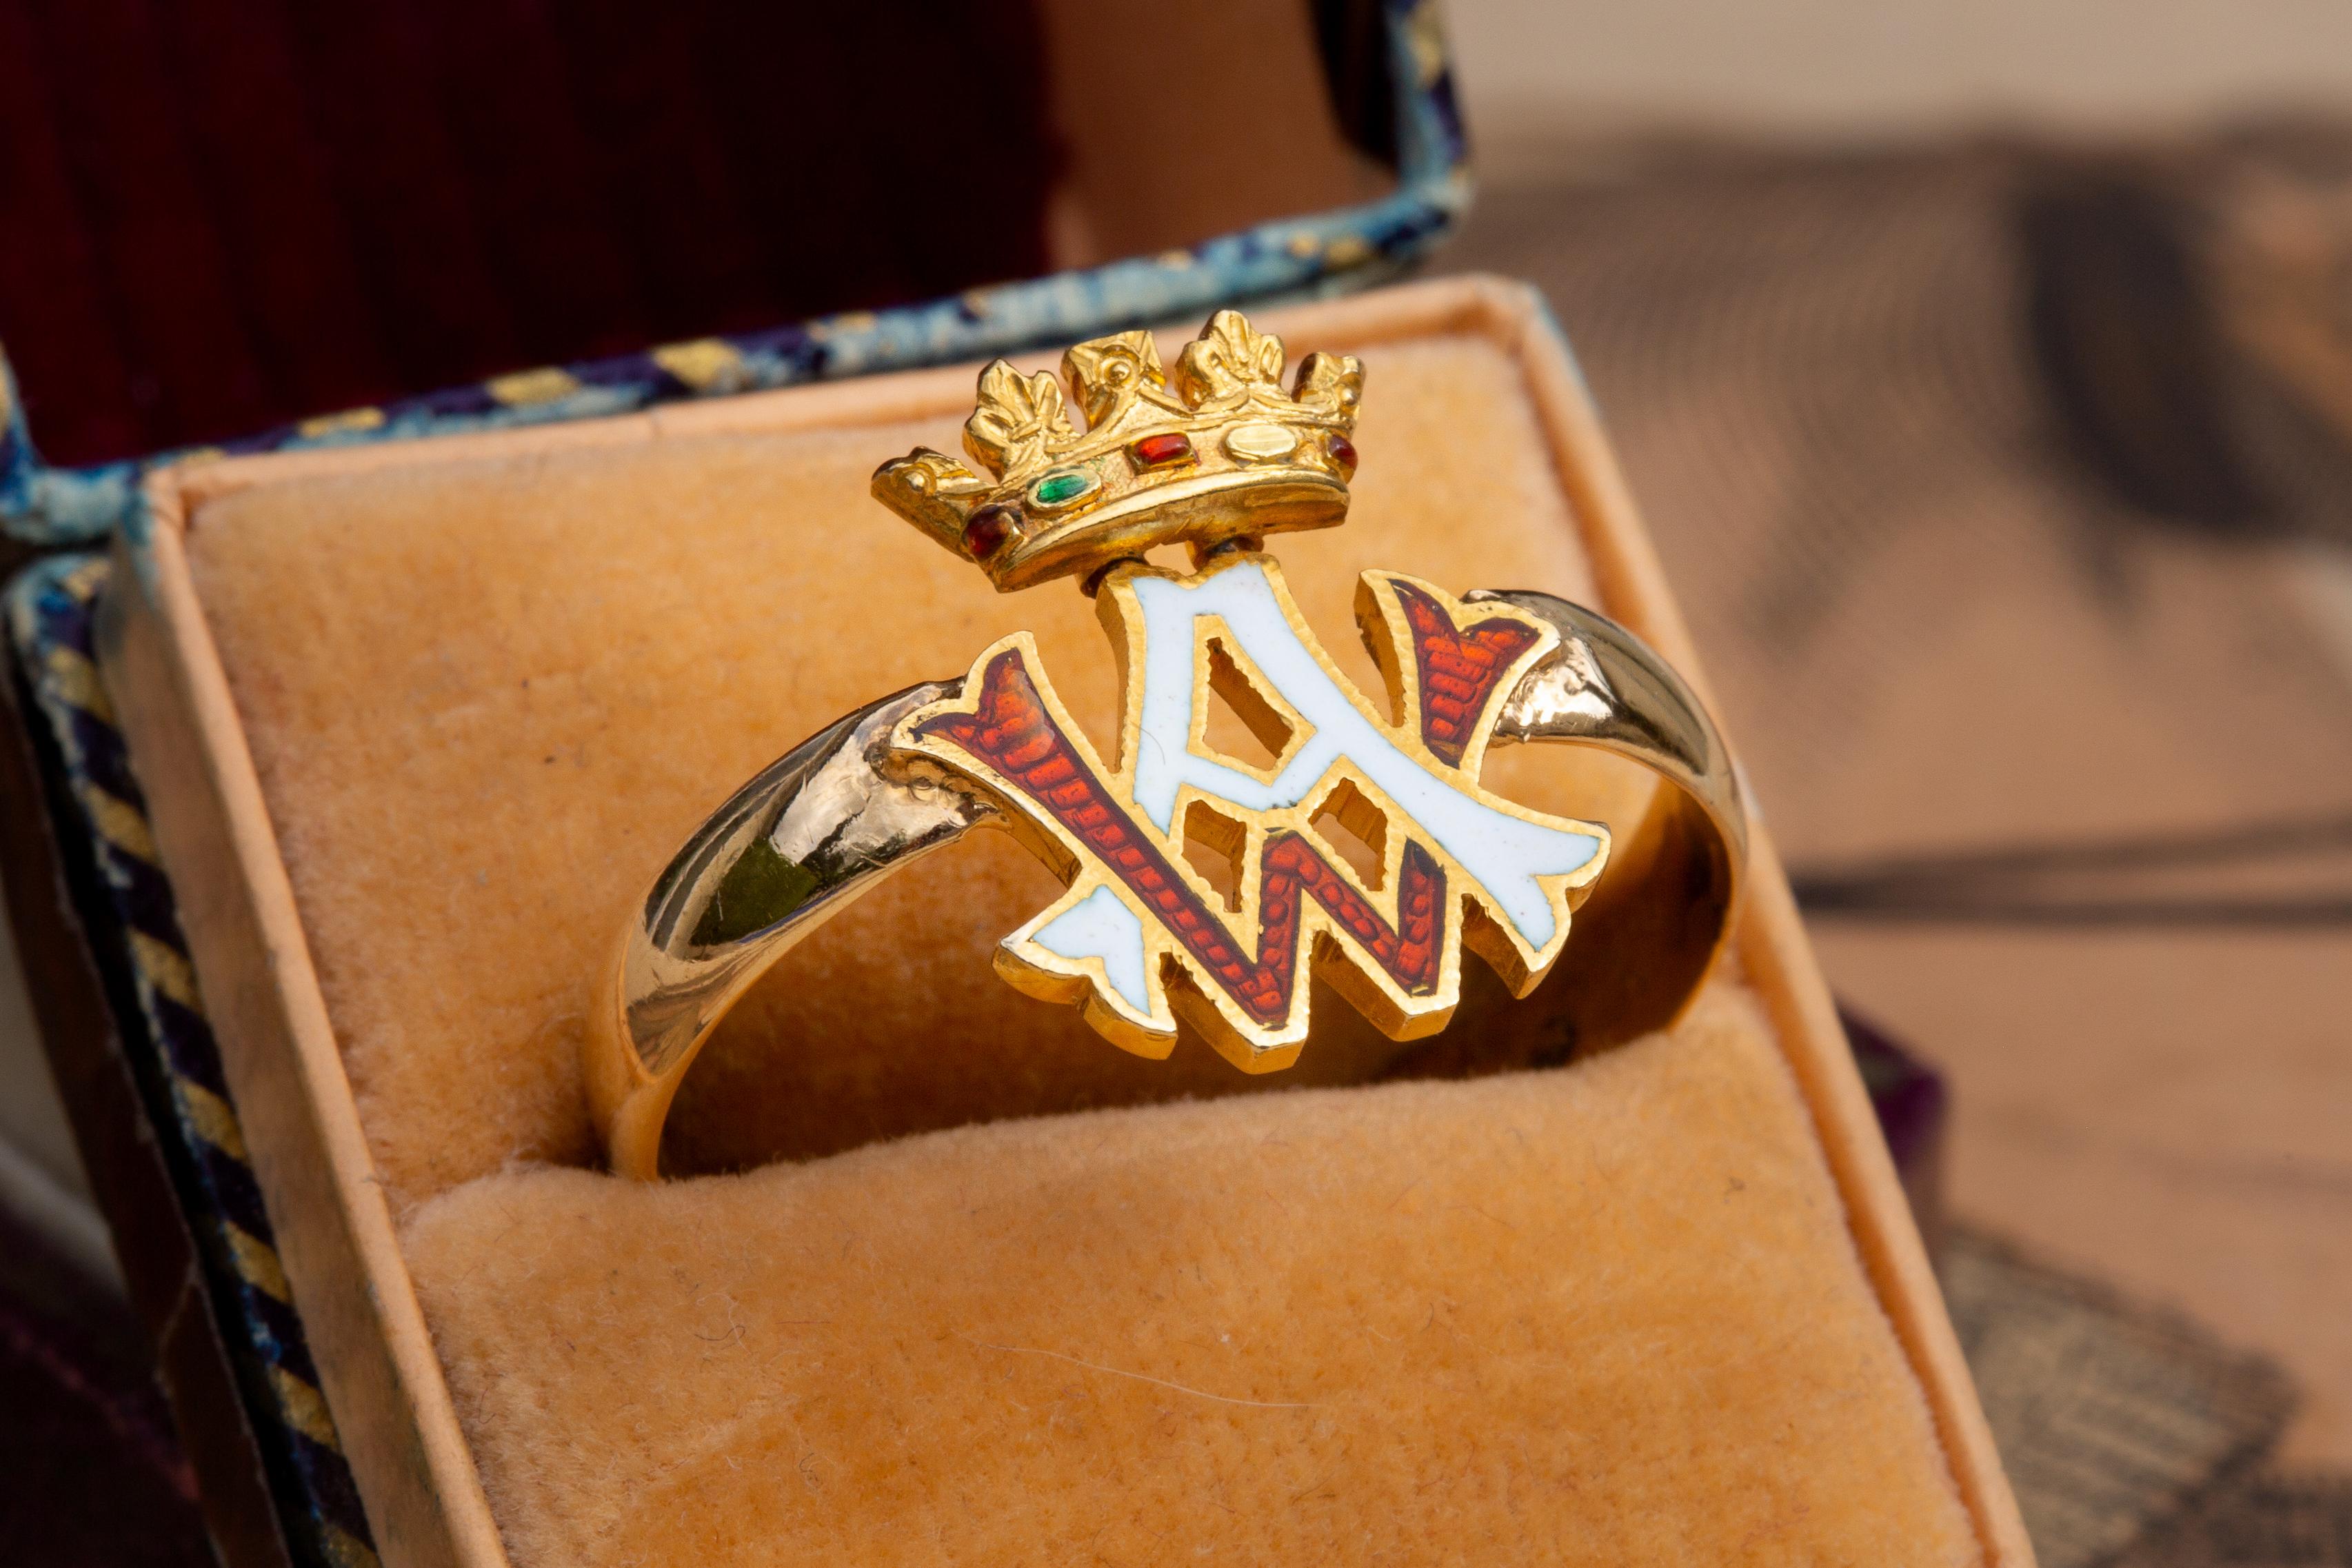 A beautifully enamelled Royal monogram ‘cypher’ presentation ring of Prince Arthur William, Duke of Connaught and Strathern. It was made around 1905 and crafted in 18K gold. It would have started life as a royal presentation lapel pin and has since